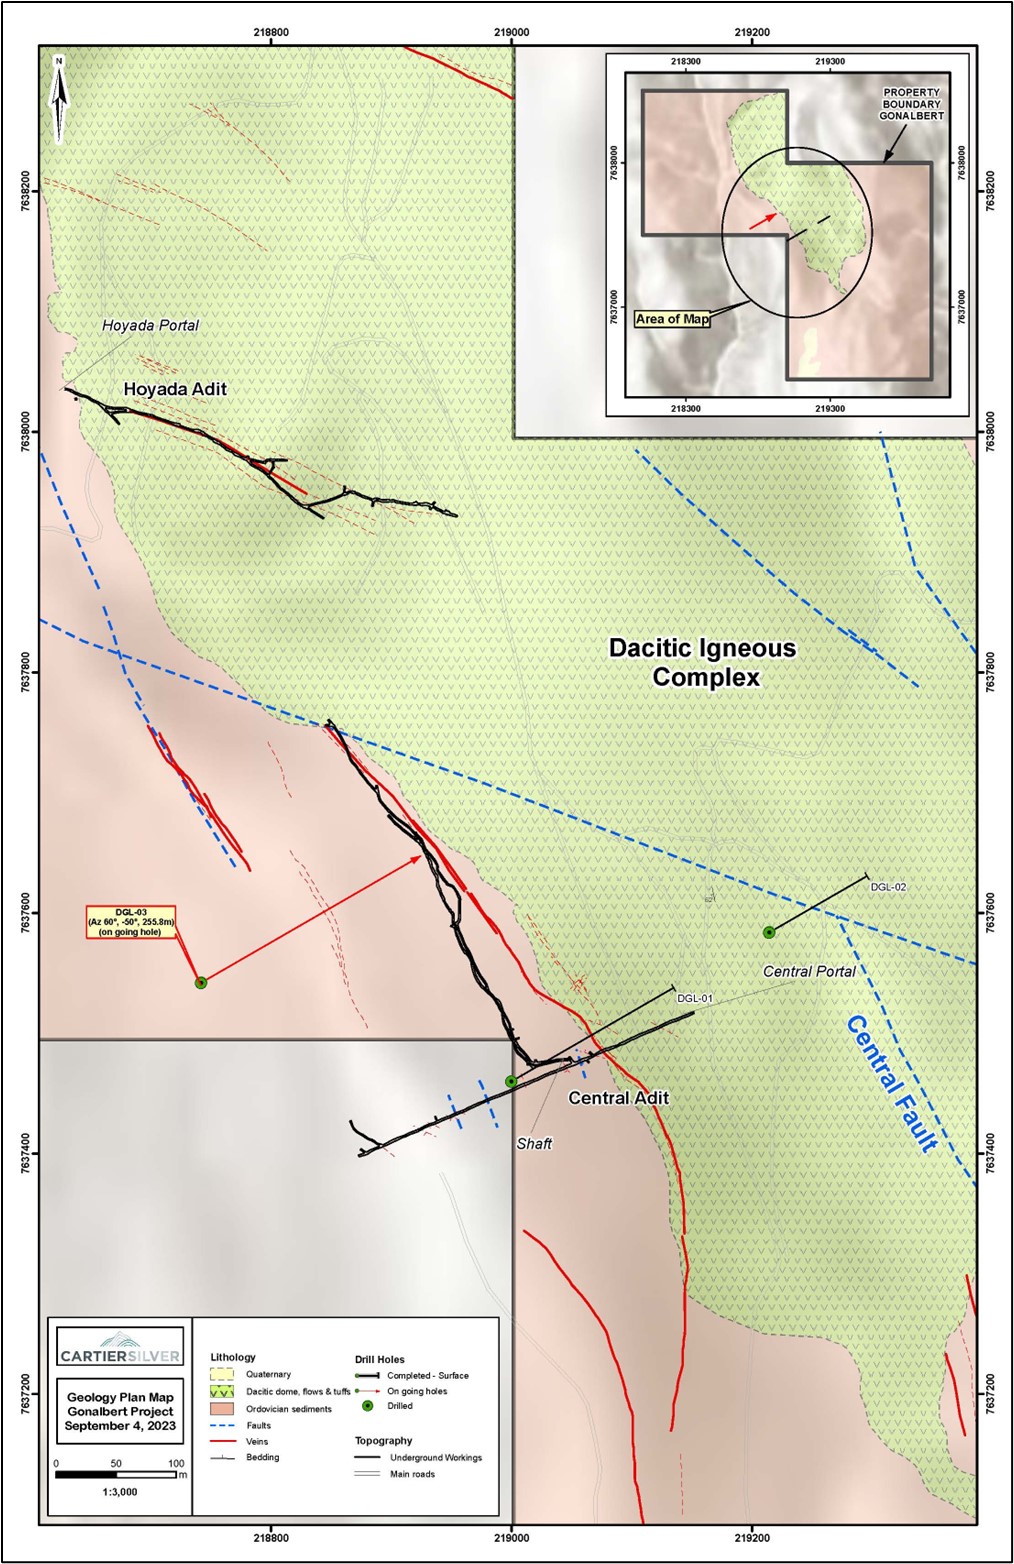 Geology Plan Map of Gonalbert Property Showing Locations of Diamond Drill Holes and Artisanal Mine Workings